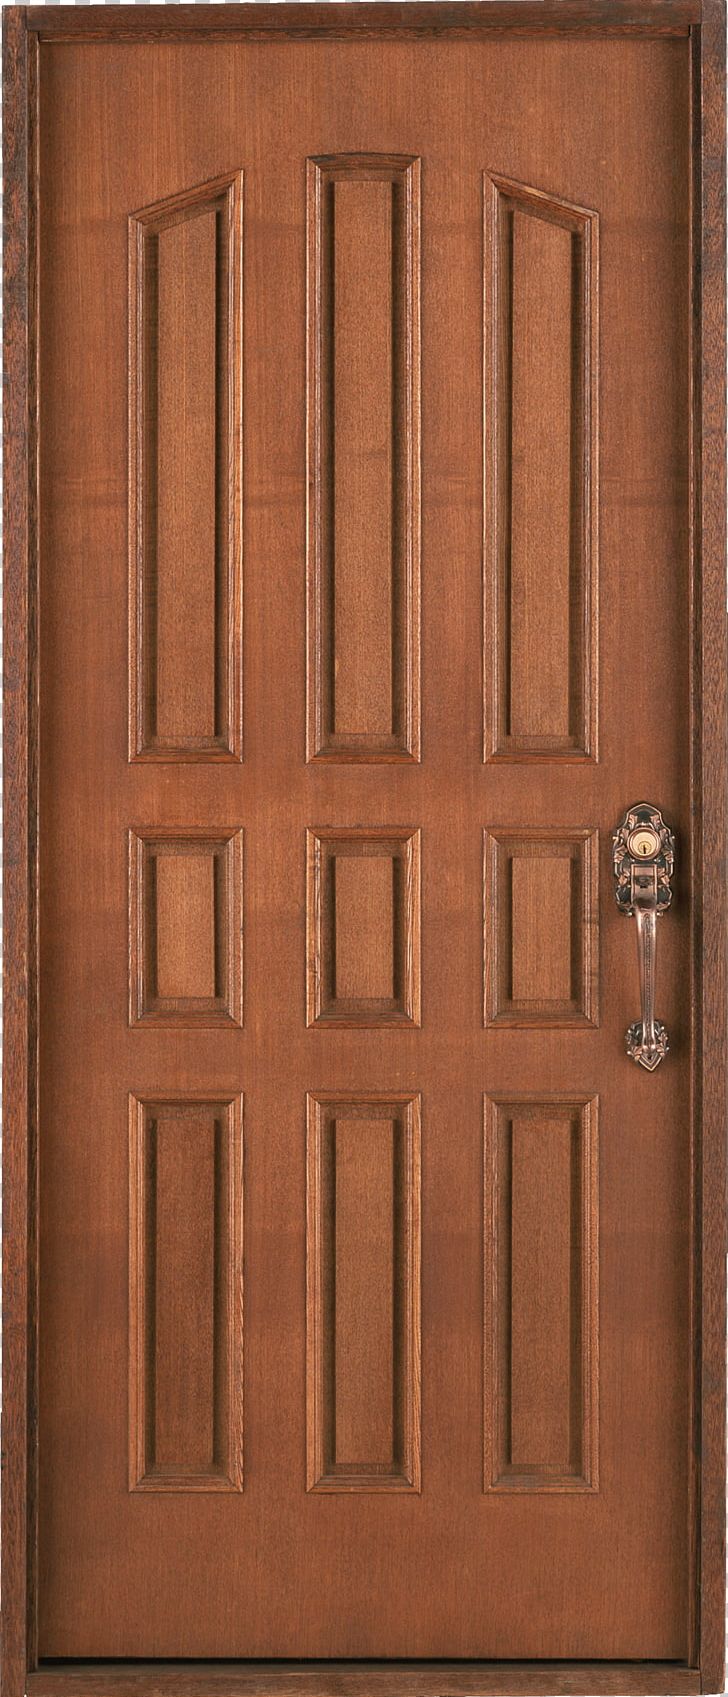 Window Door Gate Building Therma Tru Ltd PNG, Clipart, Brown, Building, Cabinetry, Chair, Closet Free PNG Download